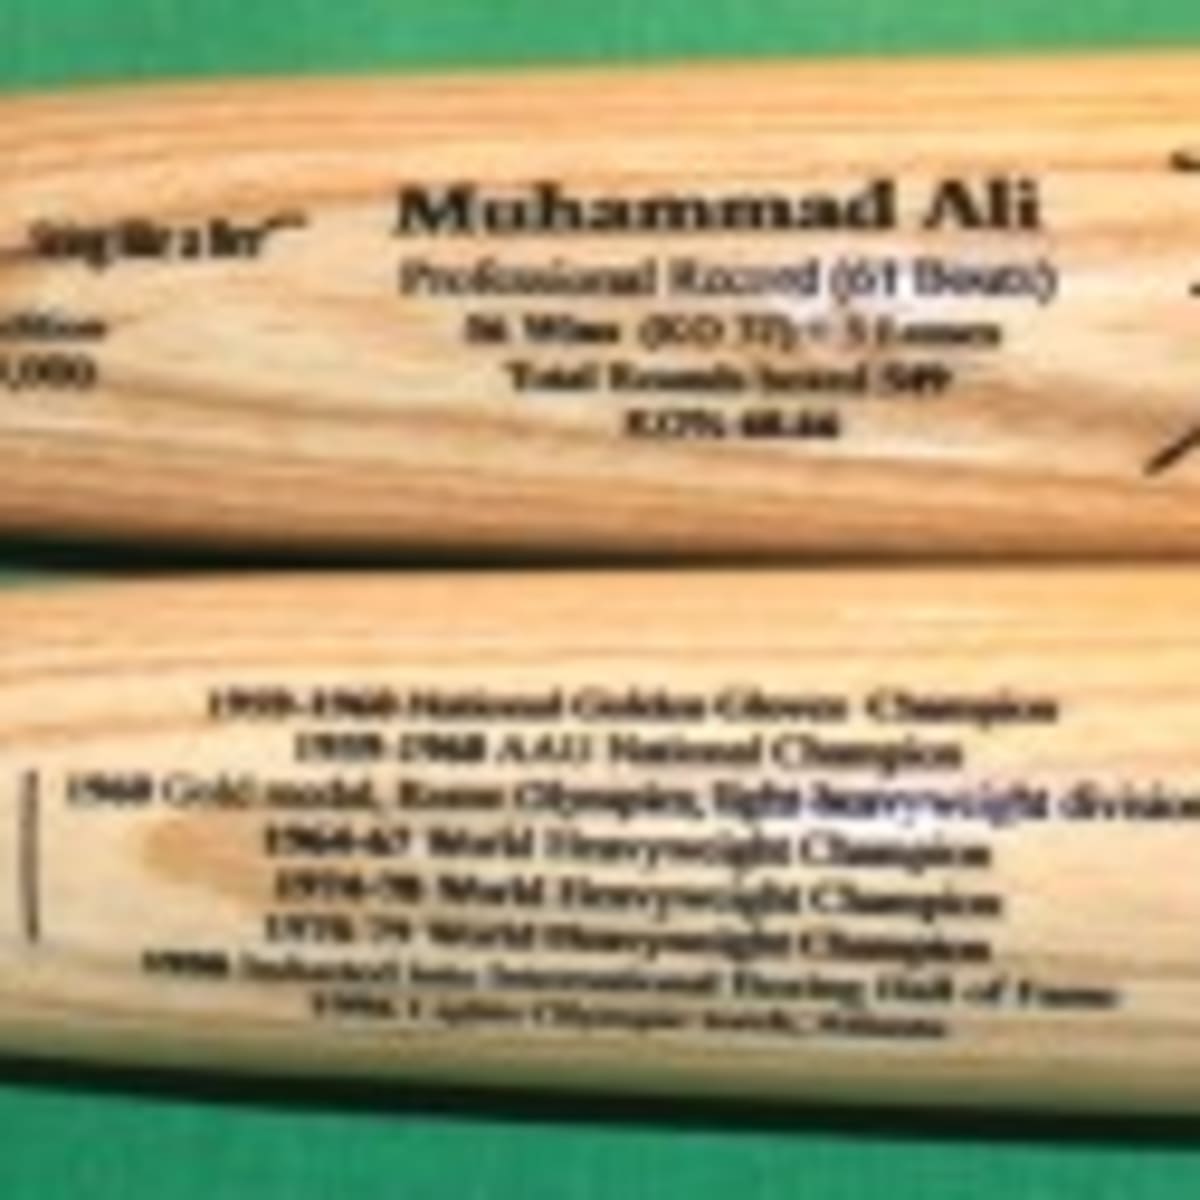 Louisville Bats honor Muhammad Ali with special uniforms (Photo)